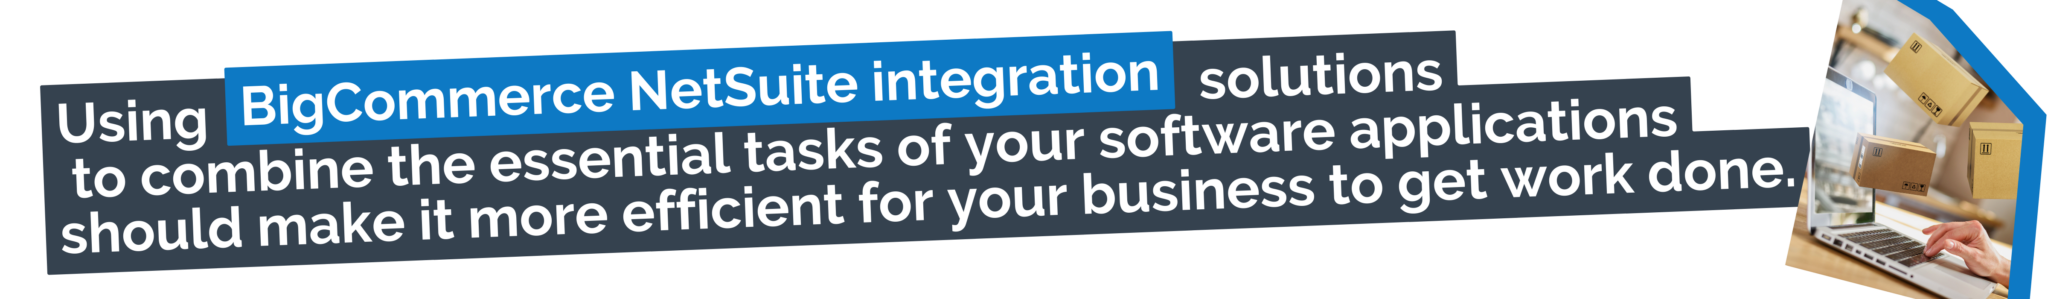 Using BigCommerce NetSuite integration solutions to combine the essential tasks of your software applications should make it more efficient for your business to get work done.